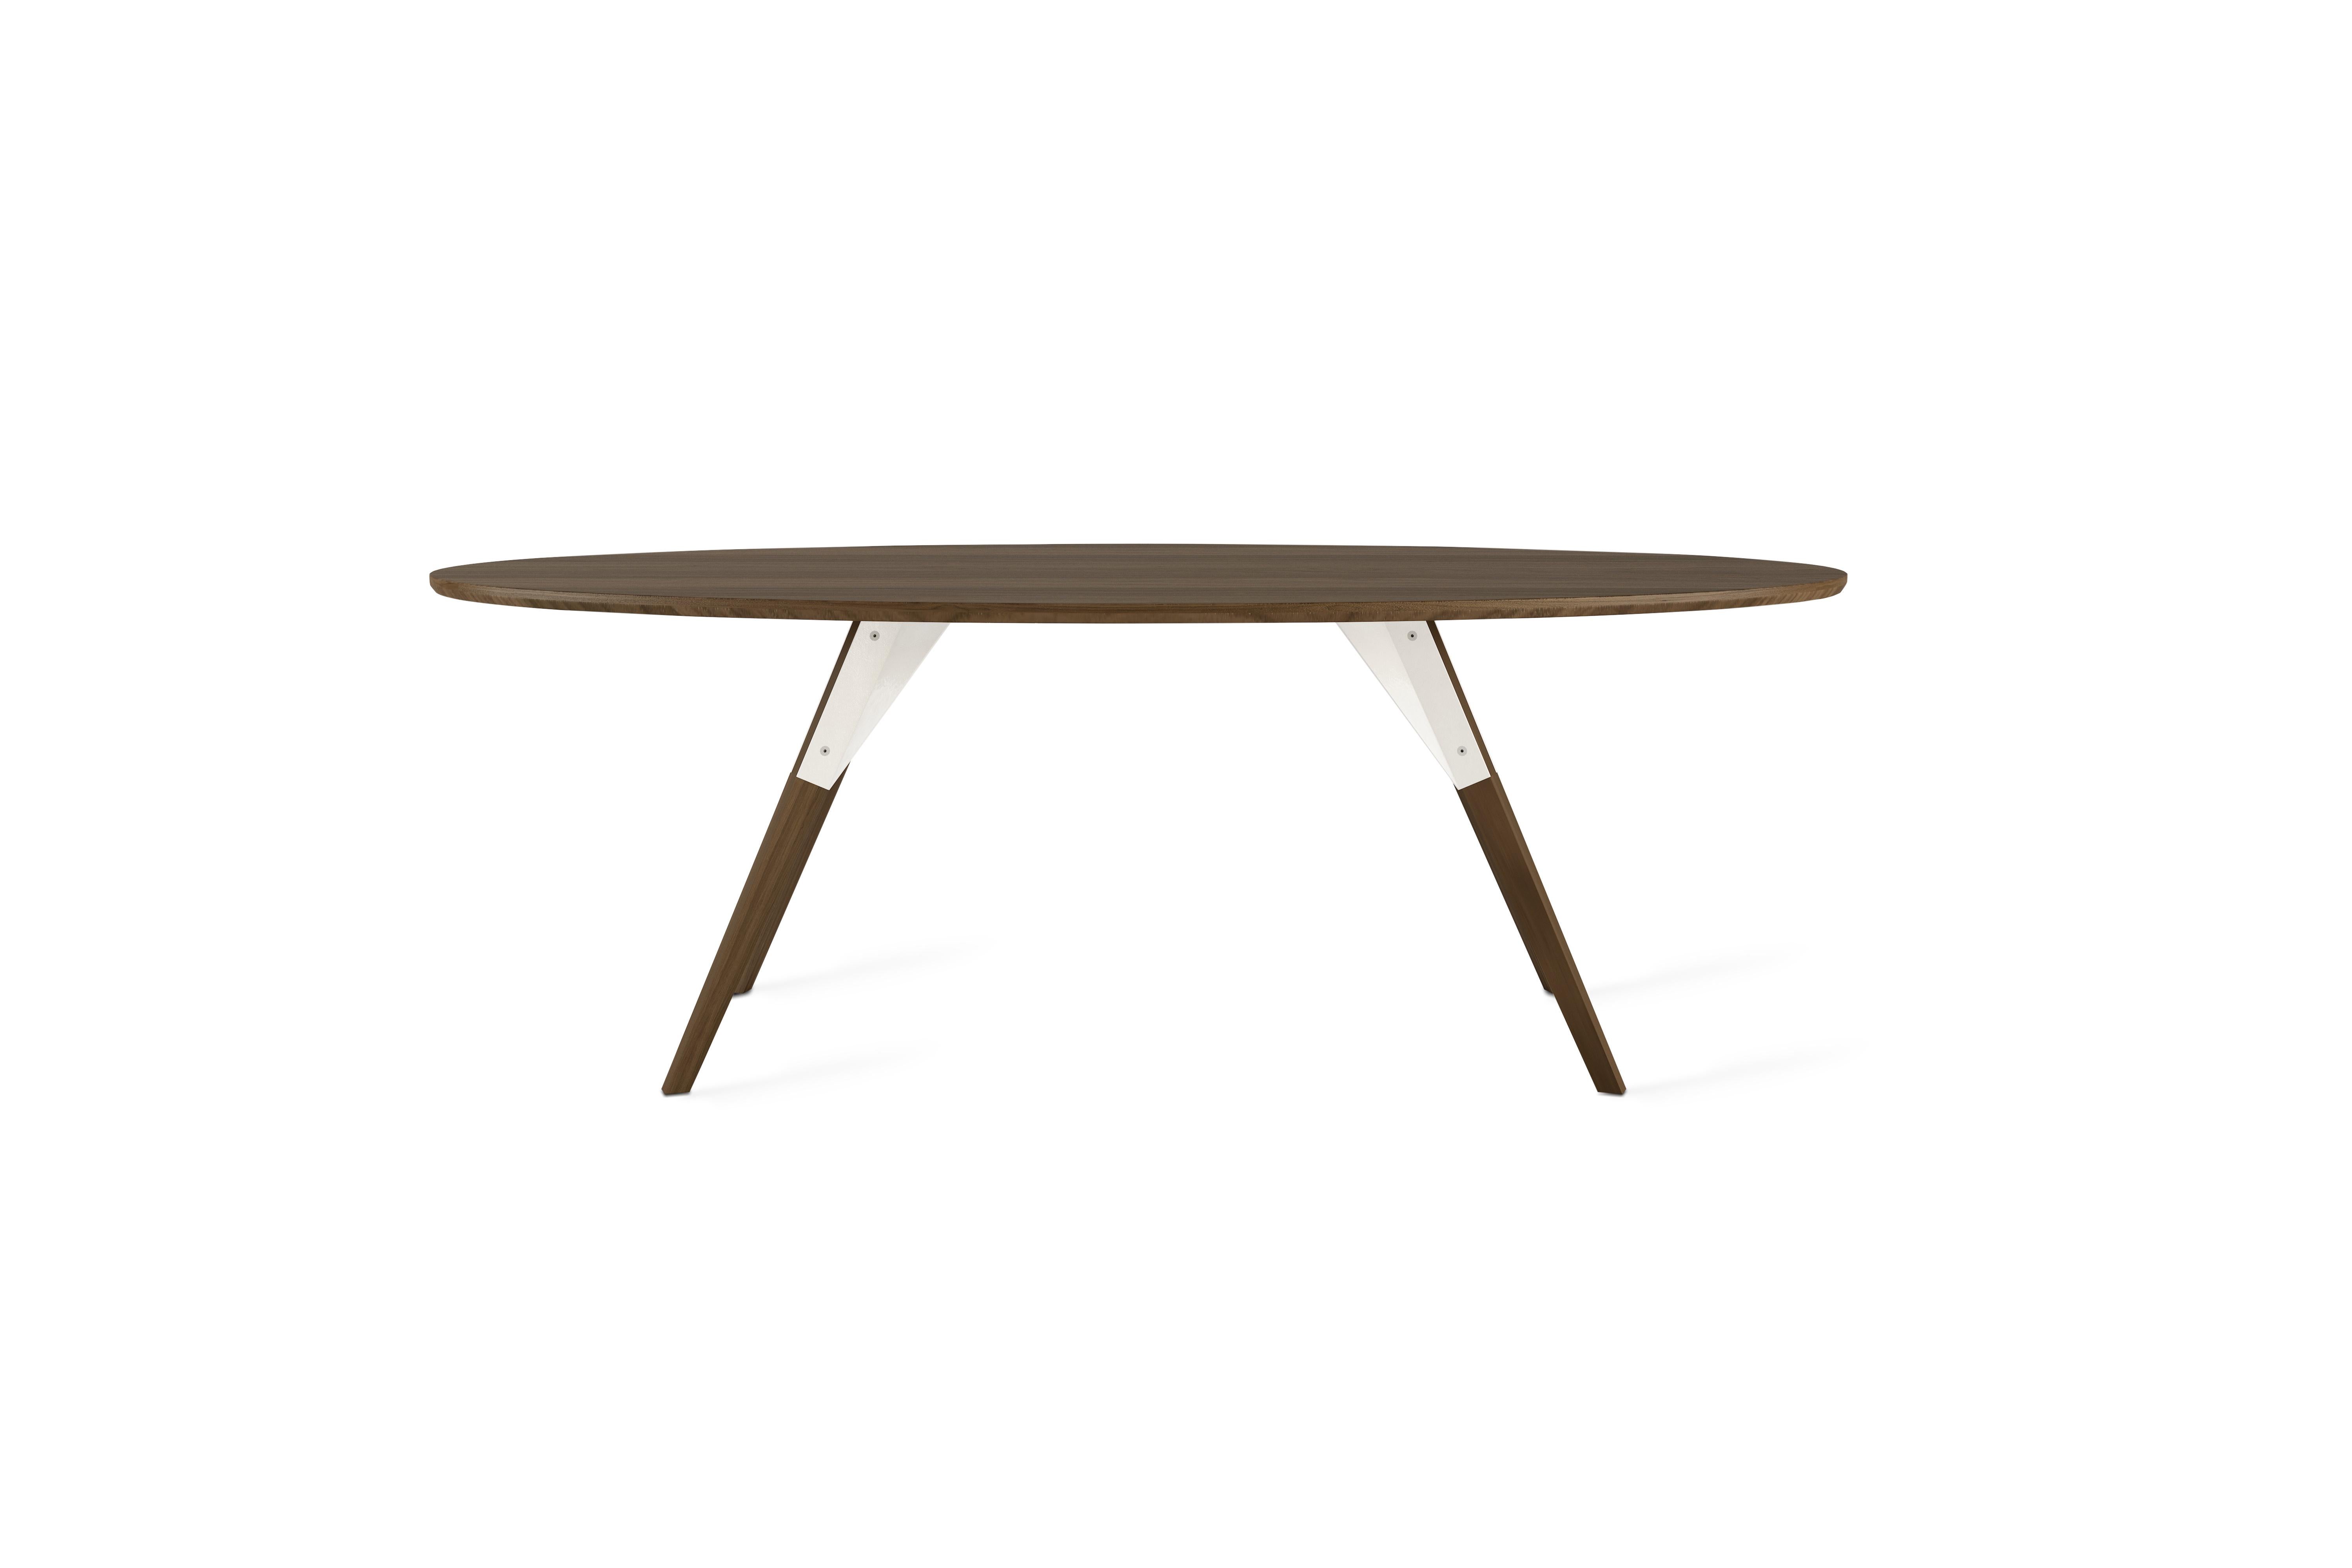 The Clarke Collection comes in ten different table top sizes, two wood species, and two metal finishes. The exposed stainless steel bolts blur the line between Scandinavian and Industrial styles.